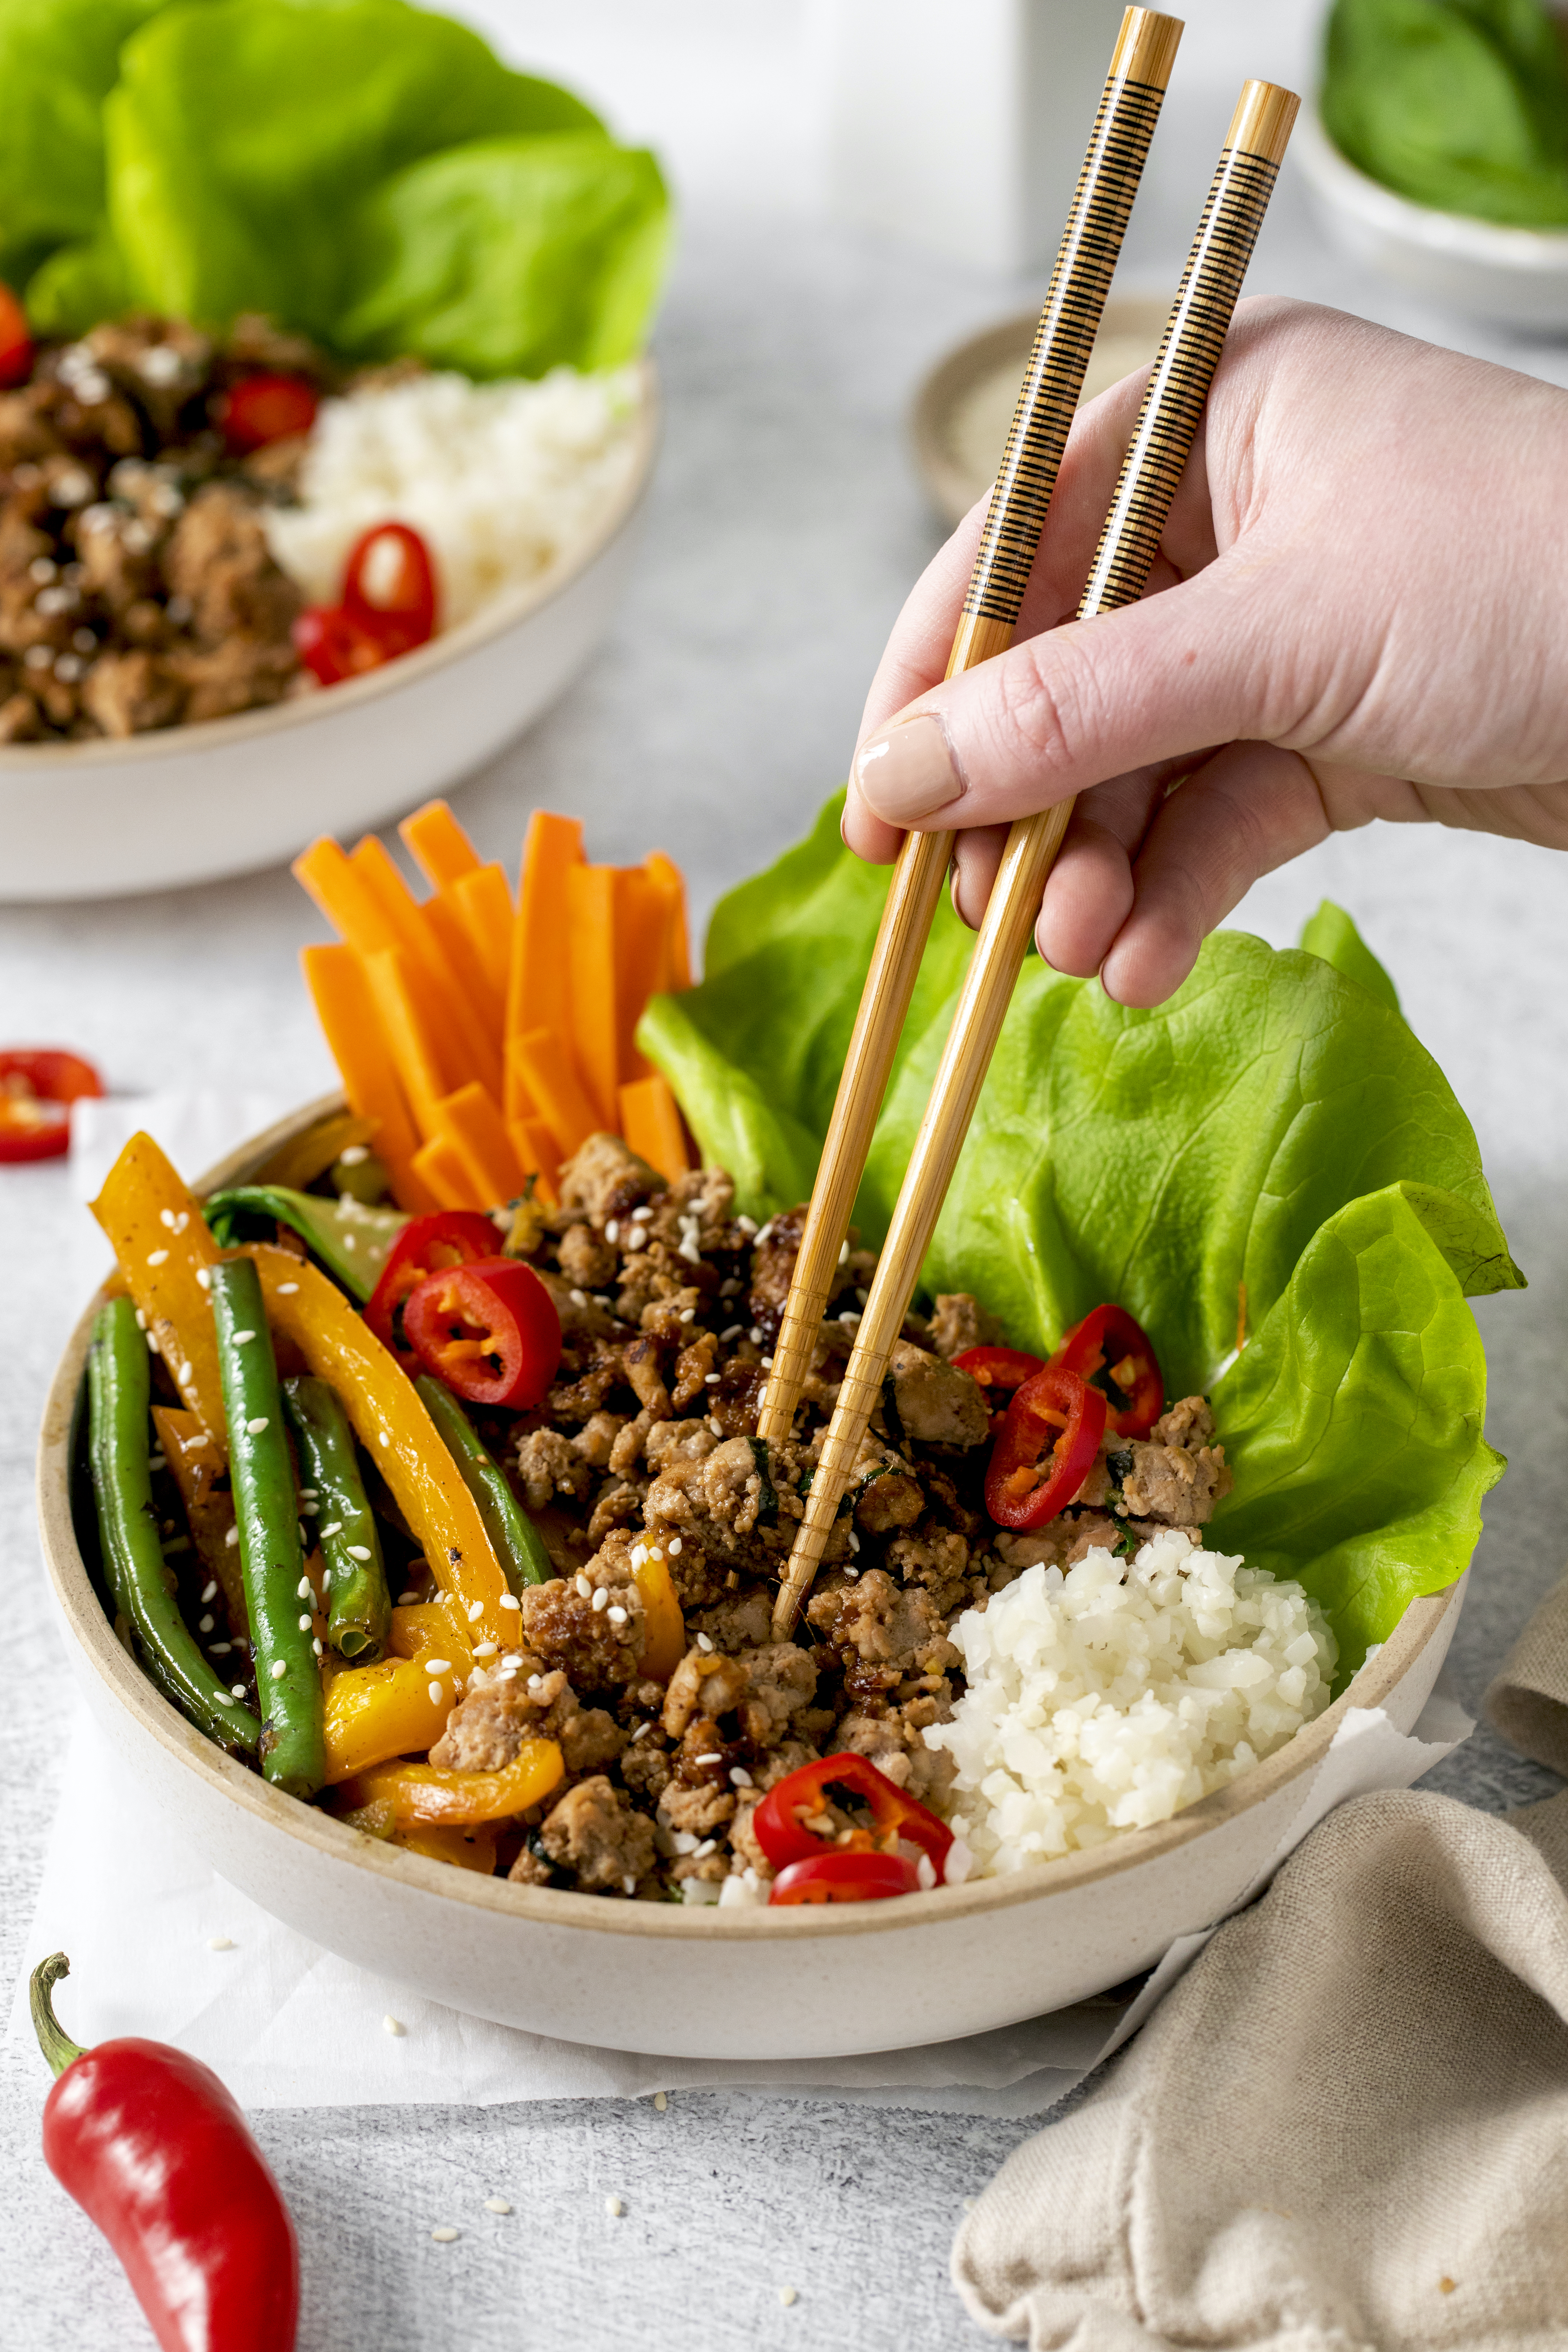 Chopsticks used to pluck ground turkey from a colorful rice bowl.